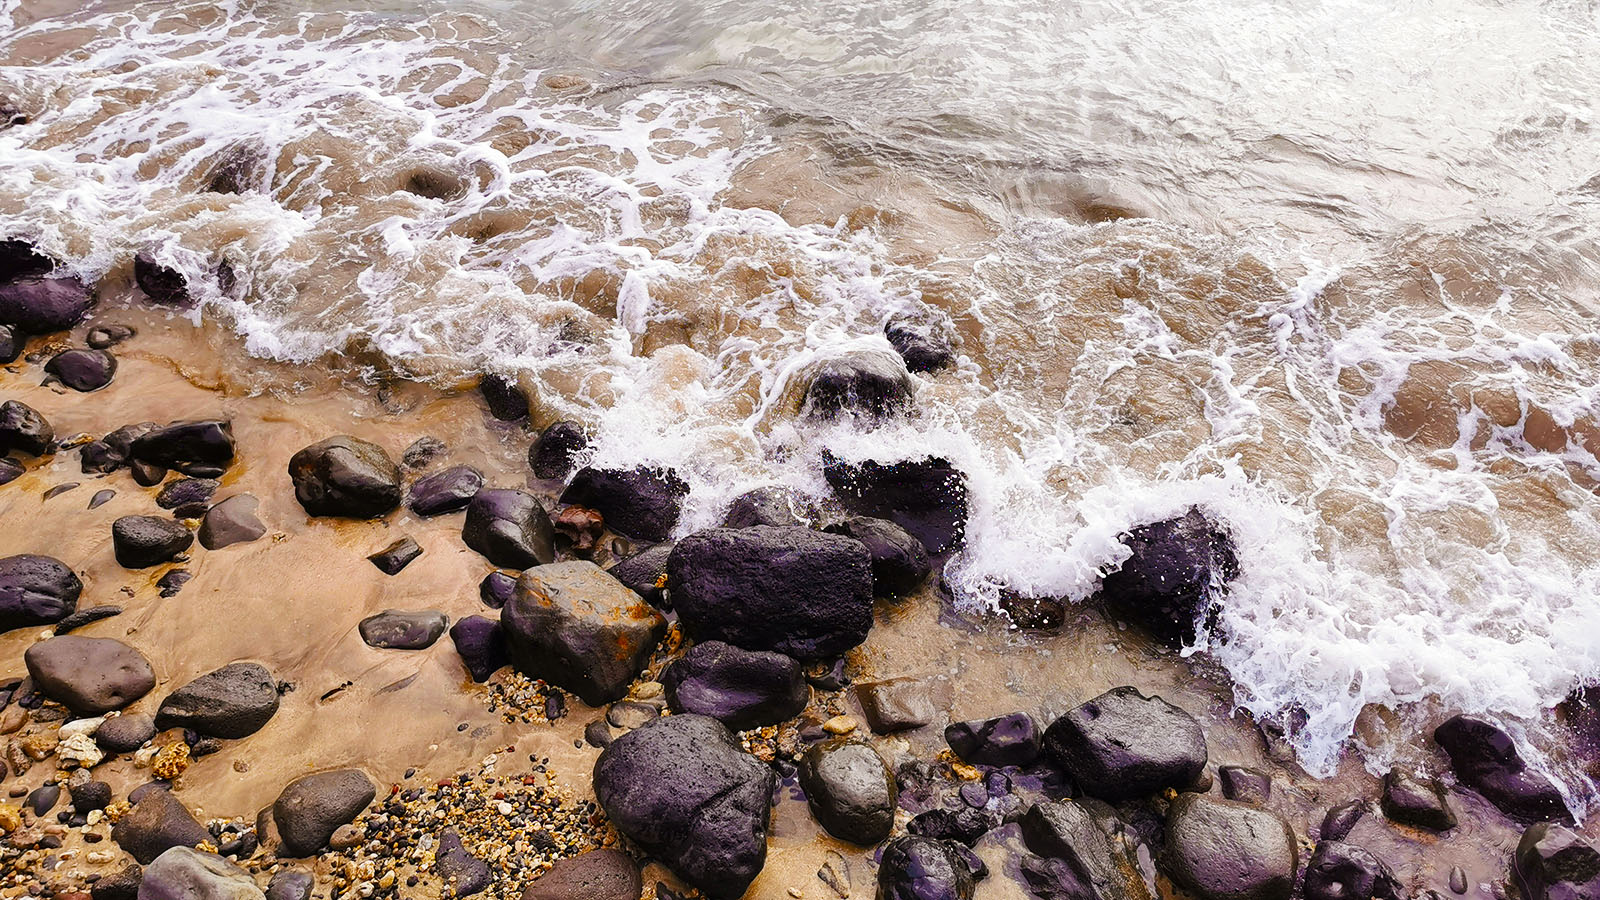 Water rolling over sand and rocks in Maui, Hawaii